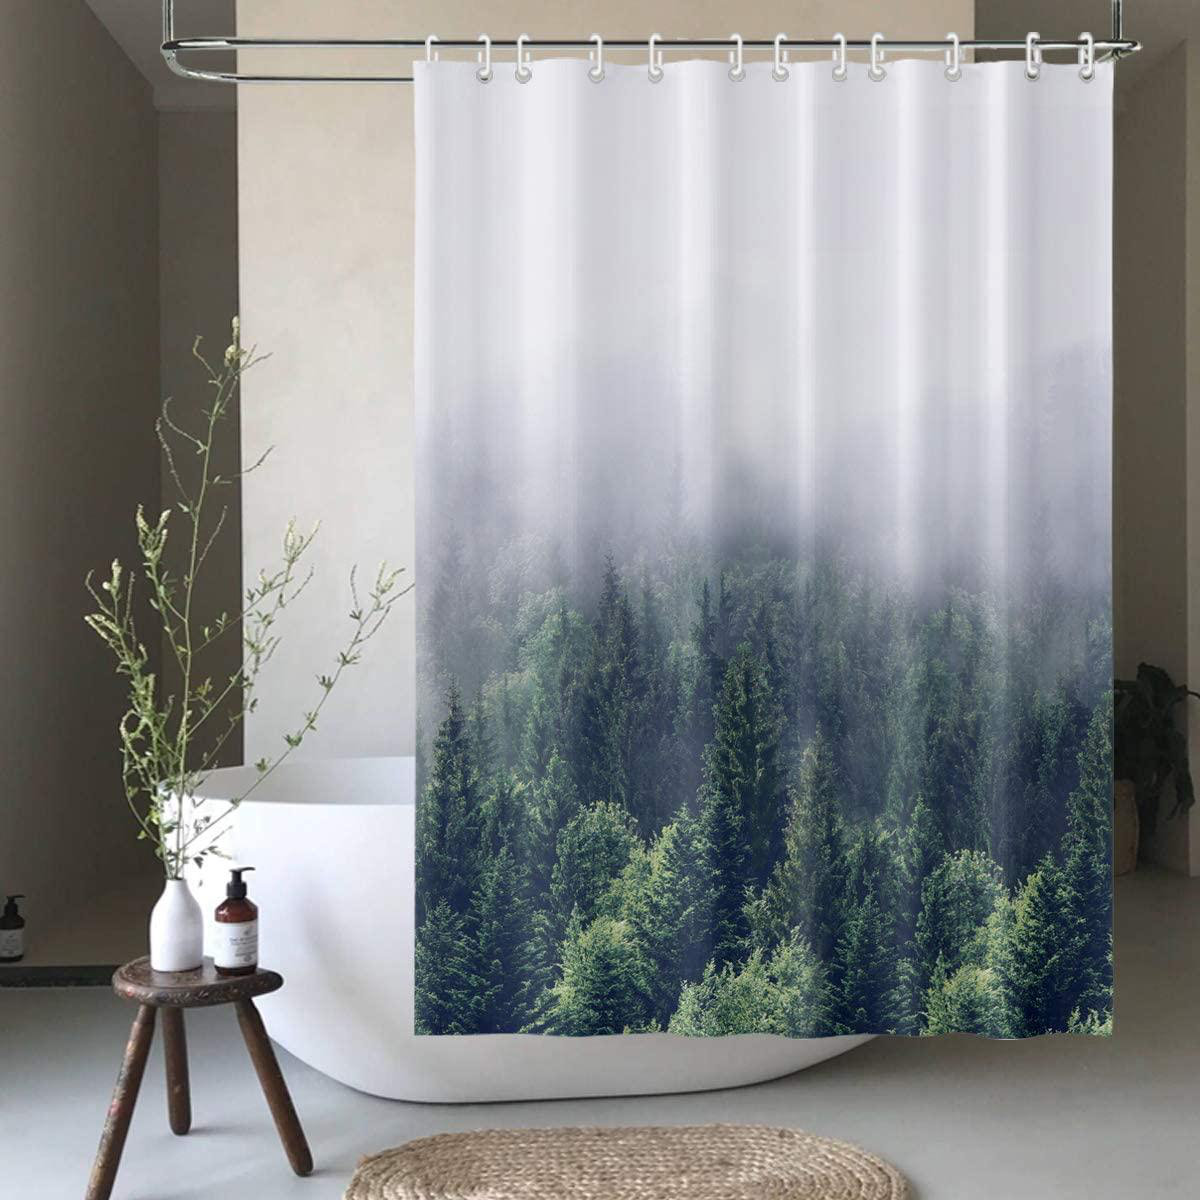 Forest Pine Trees Shower Curtain Sets Waterproof Polyester Fabric with 12 Hooks 